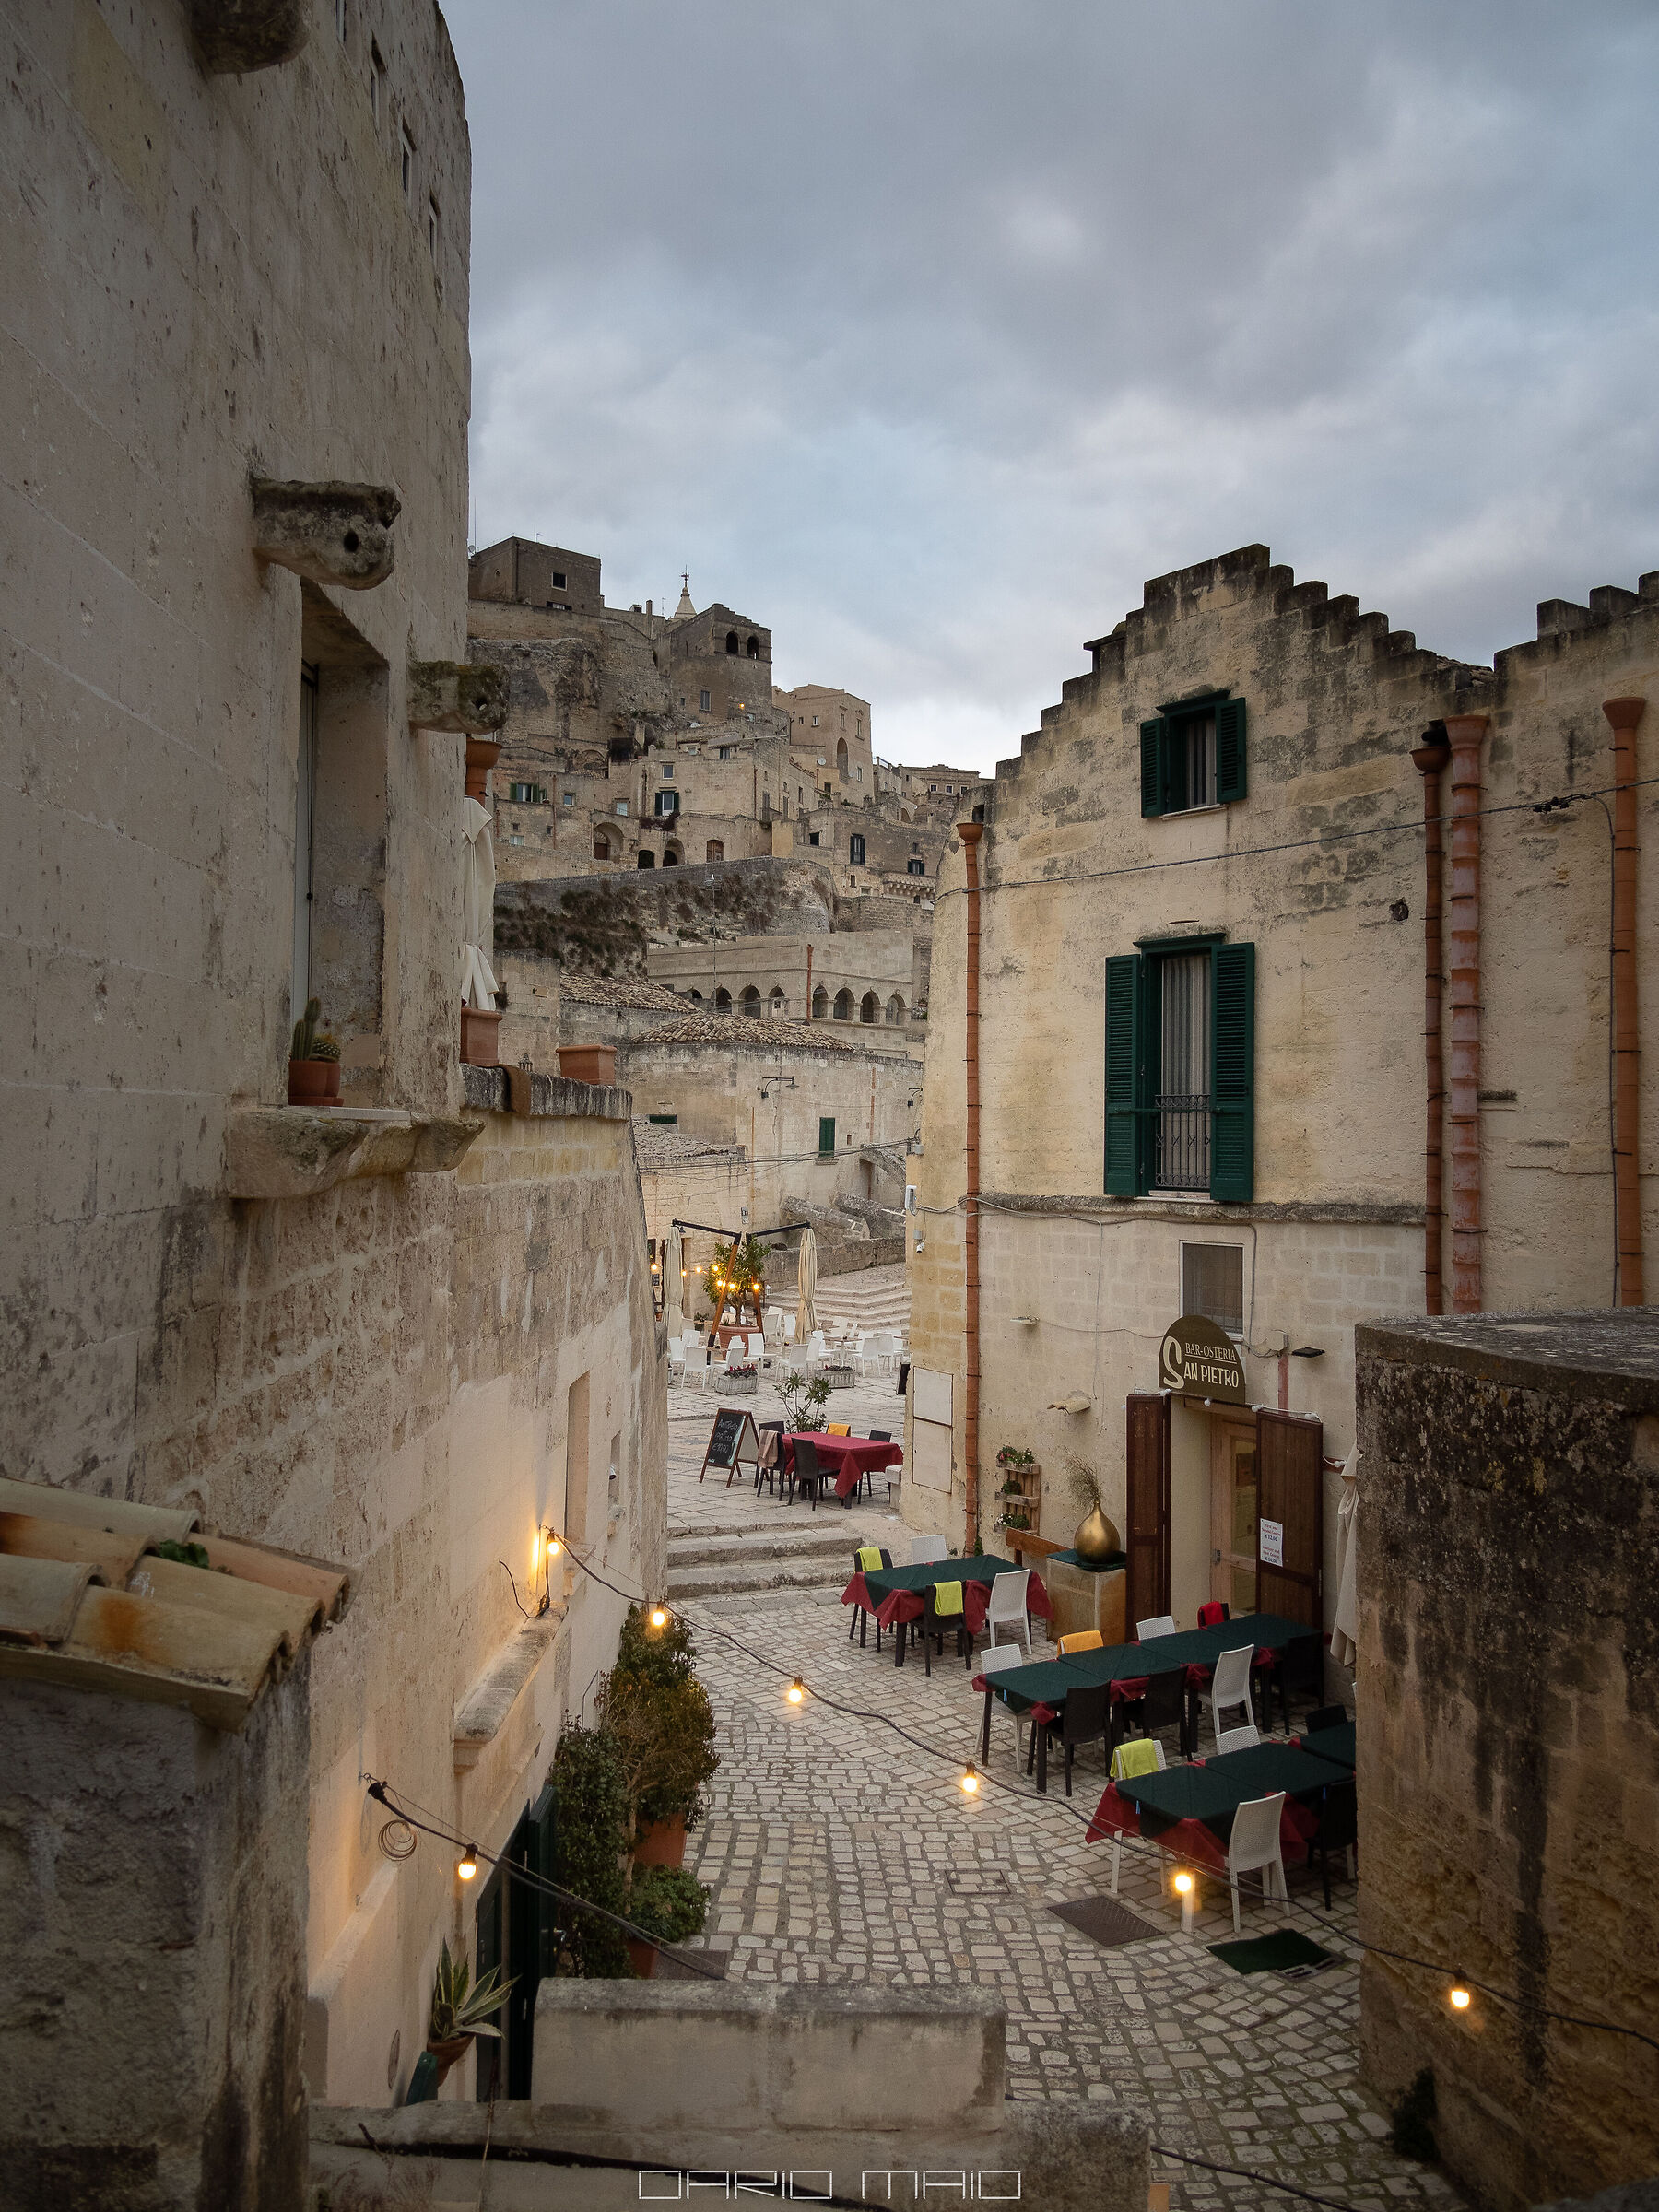 Among the alleys of Matera ...